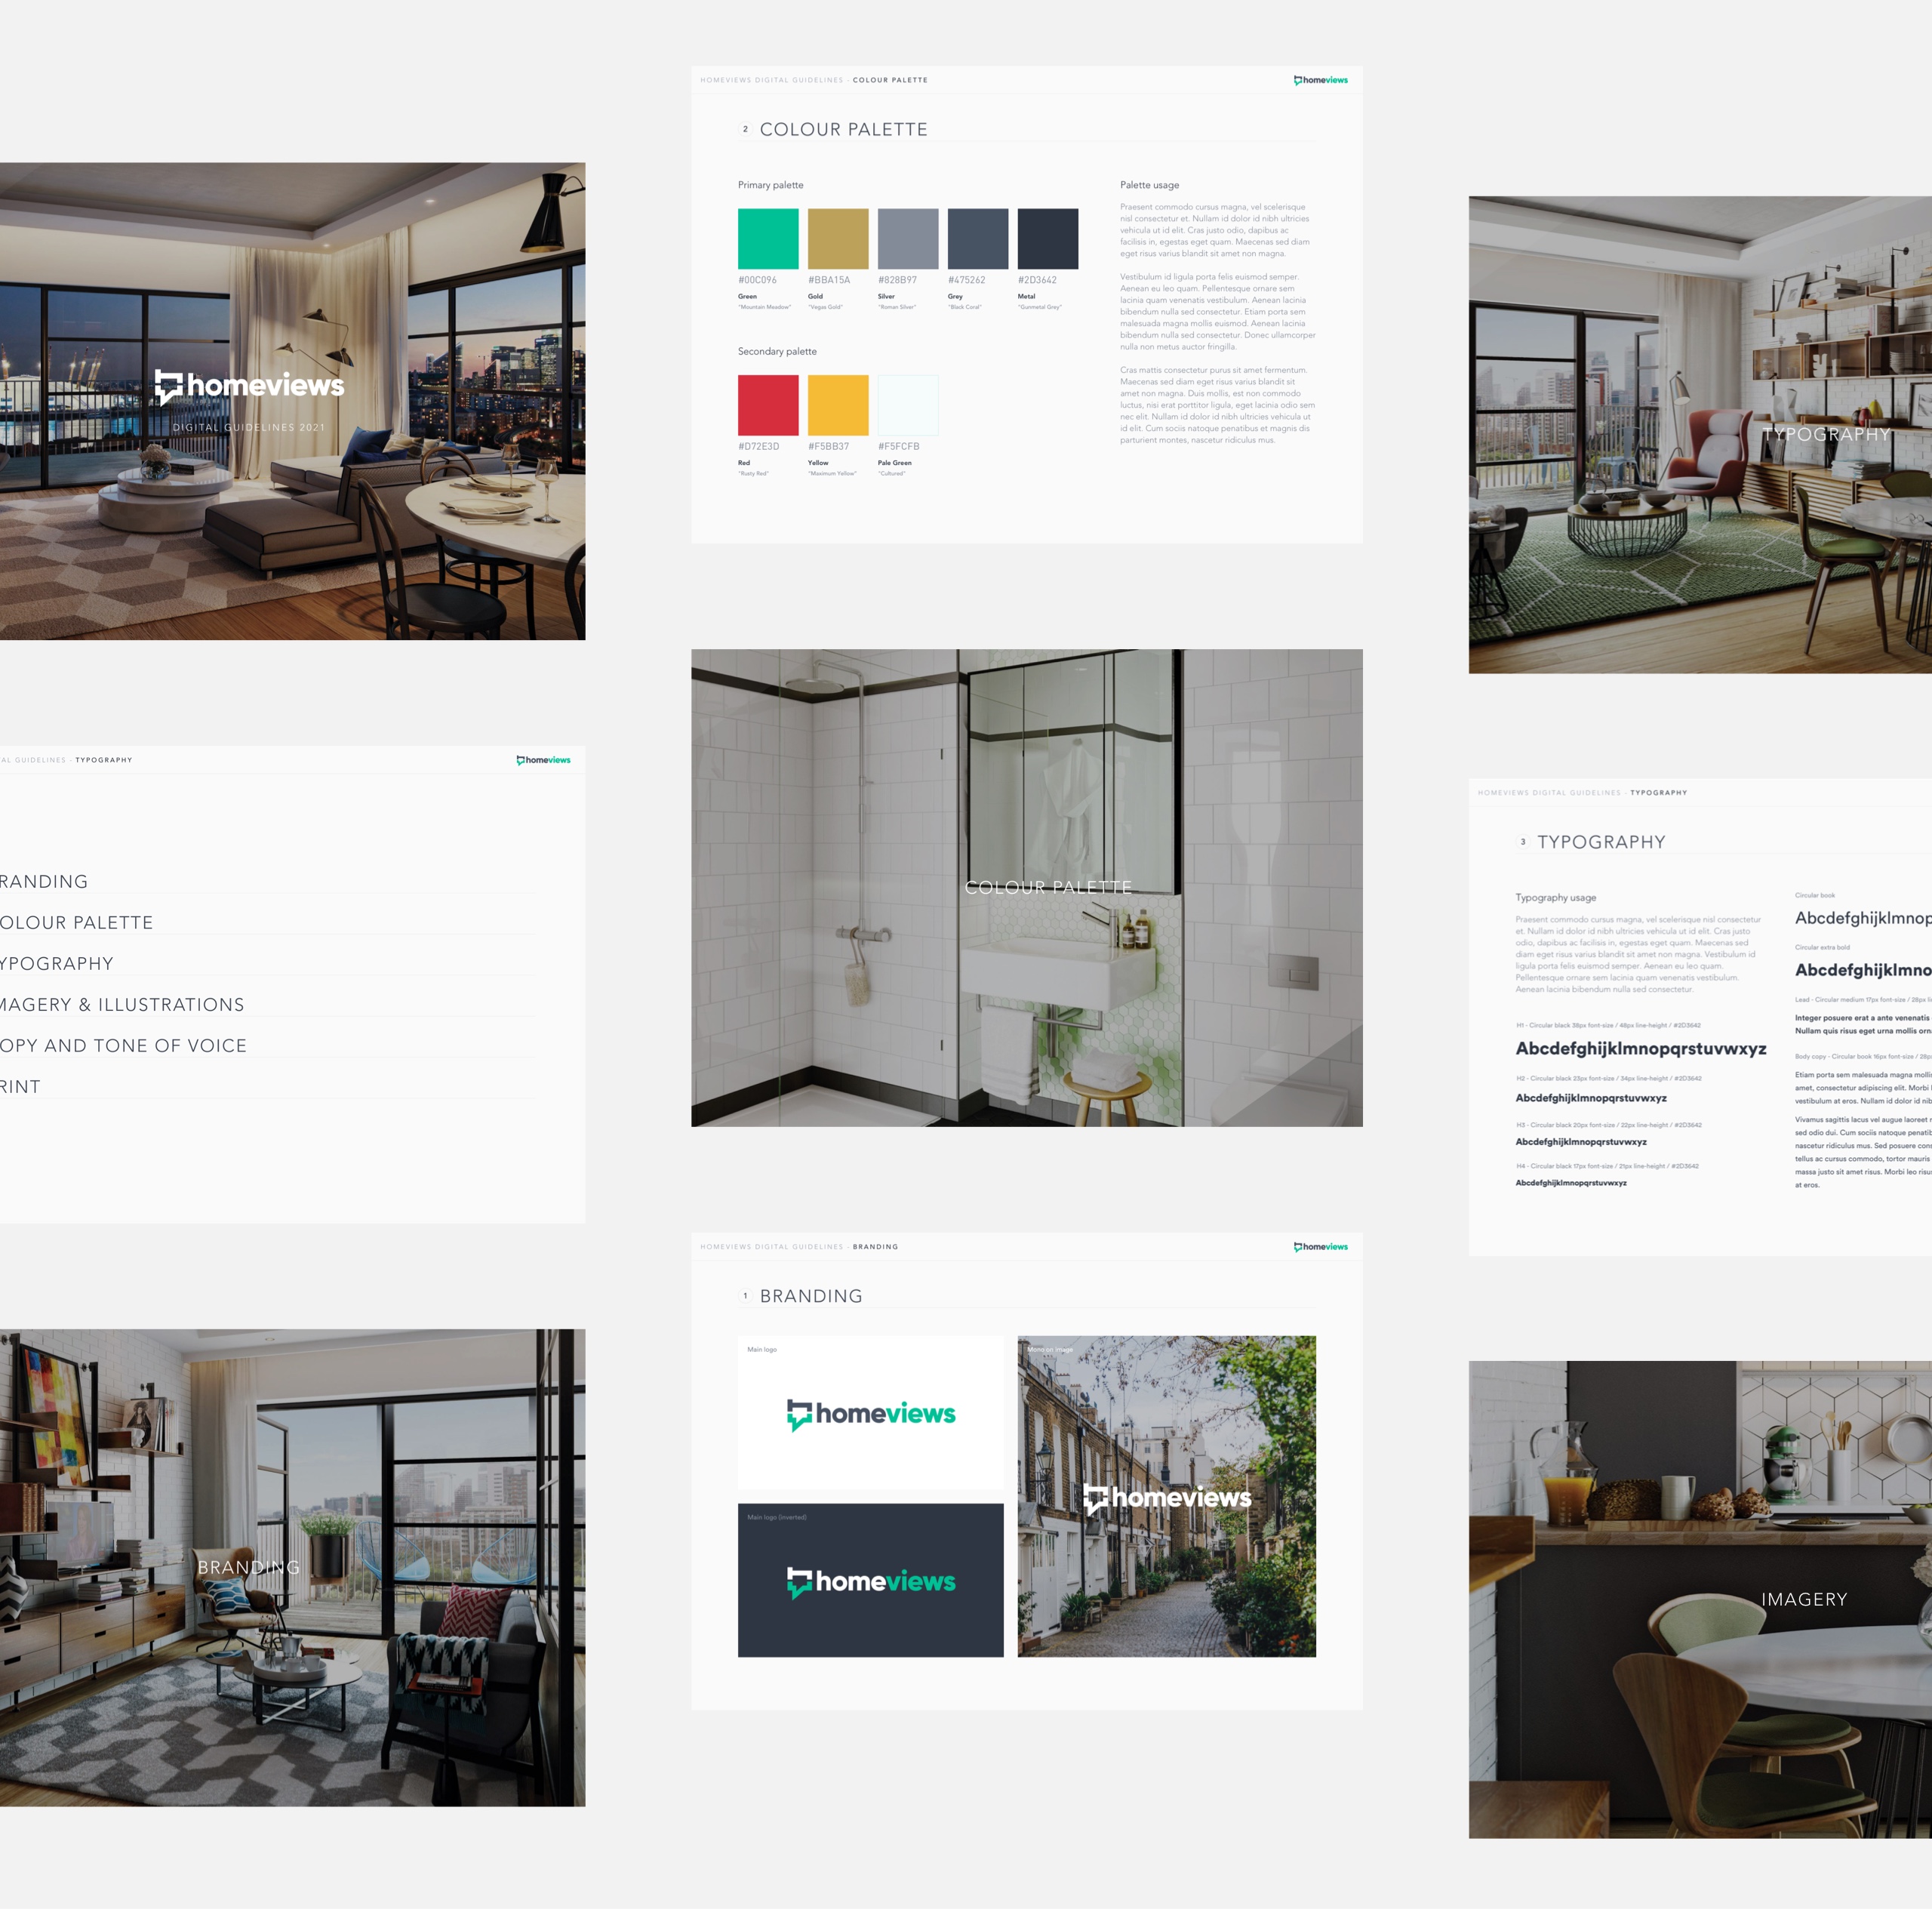 Screenshots of pages from the Homeviews digital brand guidelines